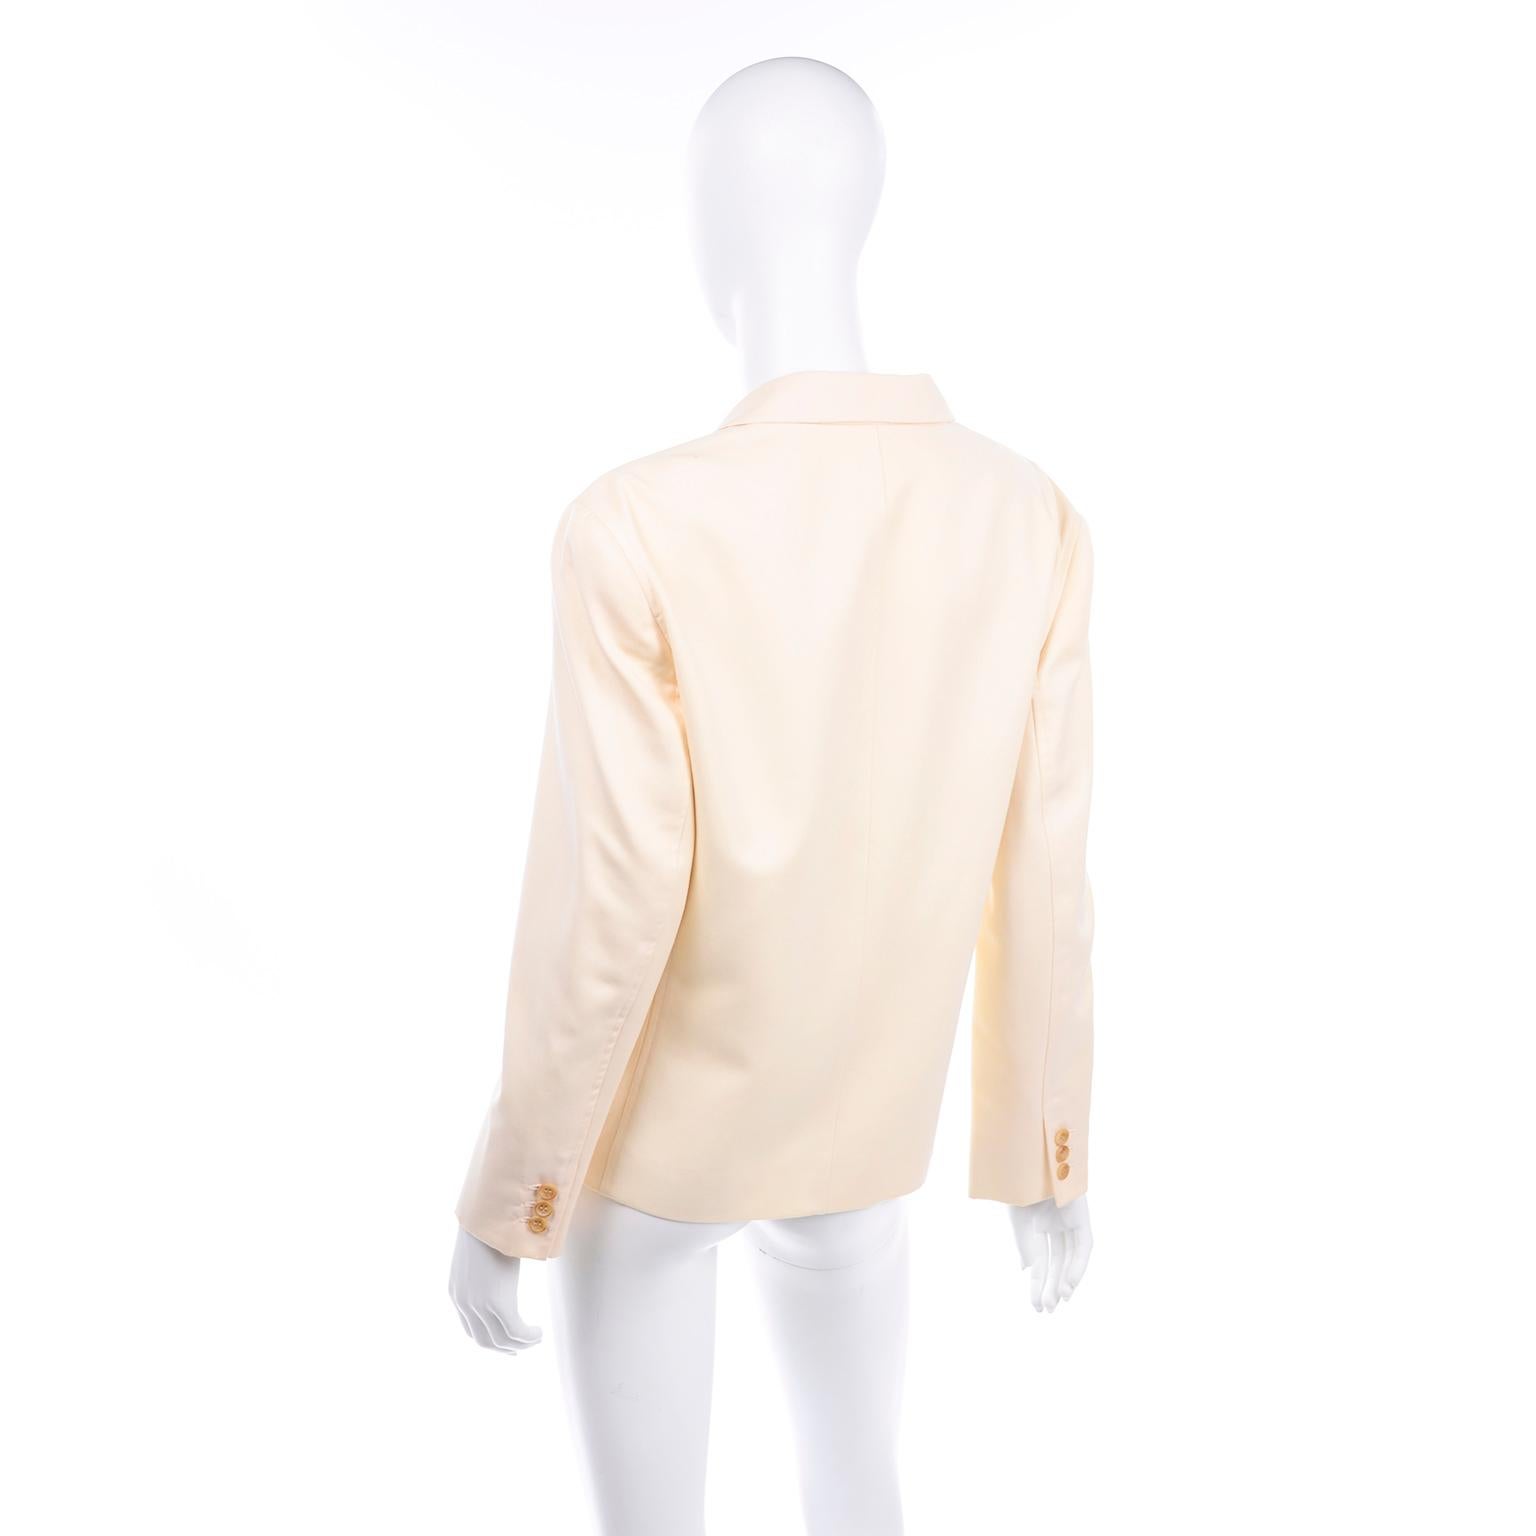 Isaac Mizrahi Vintage Cream Wool Boxy Blazer Jacket Size Large In Excellent Condition For Sale In Portland, OR